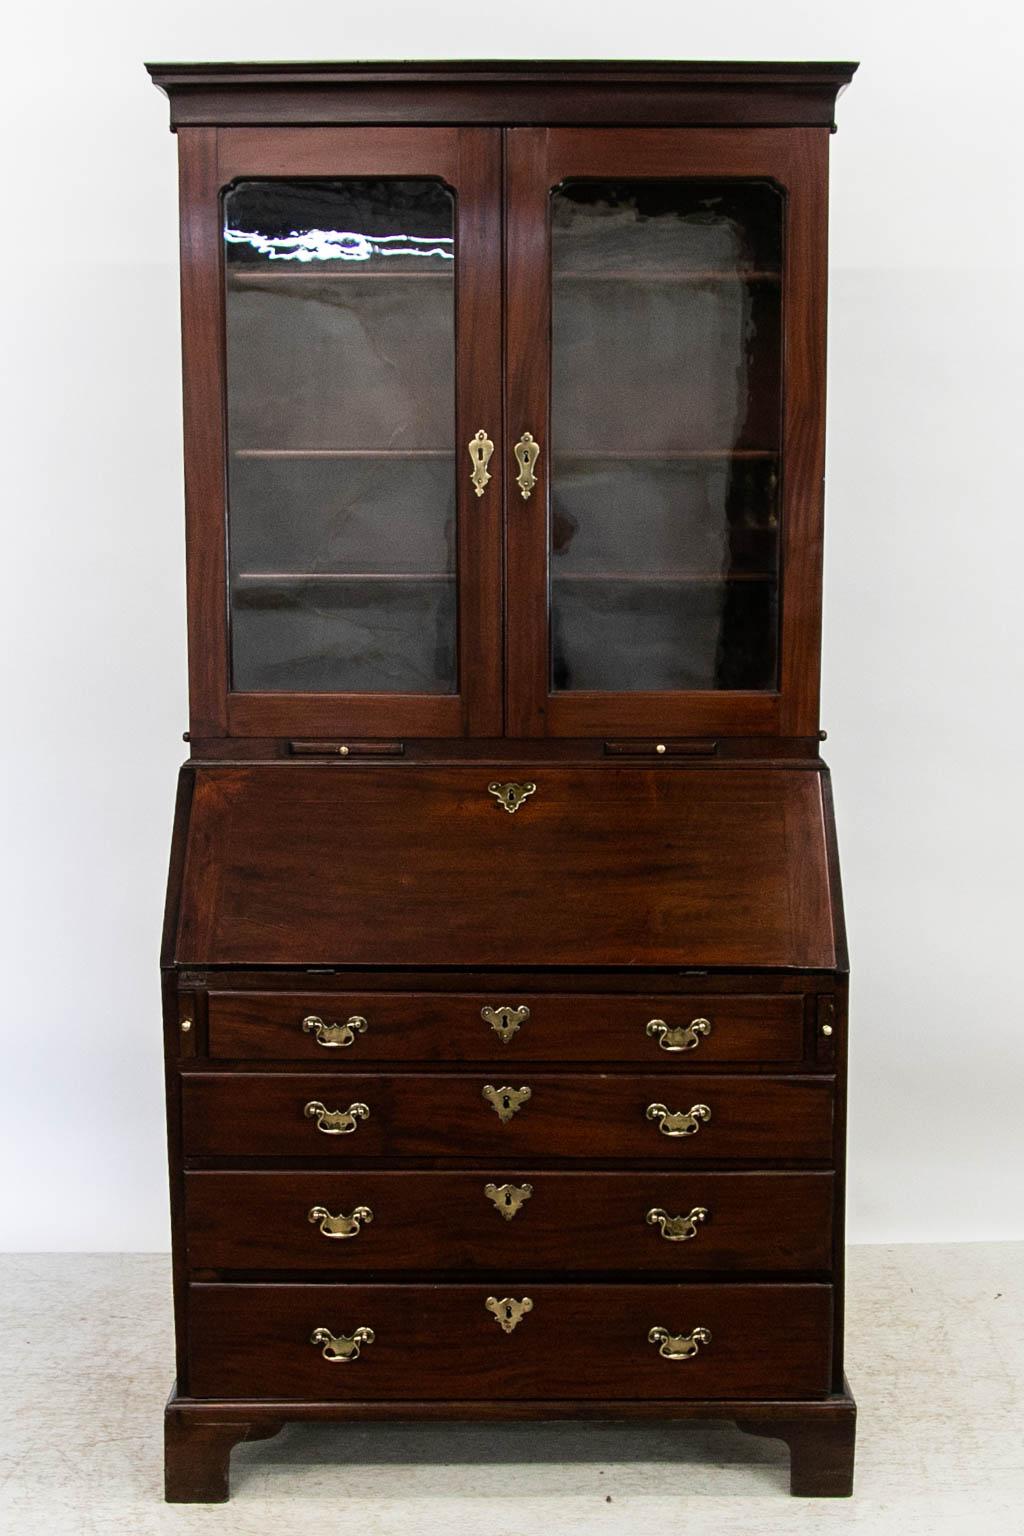 The top section of this secretary has three adjustable shelves and has two candlestick pullouts. The interior has a raised panel prospect door flanked by two carved fluted pilaster pullout compartments. There are six small drawers below six cubby